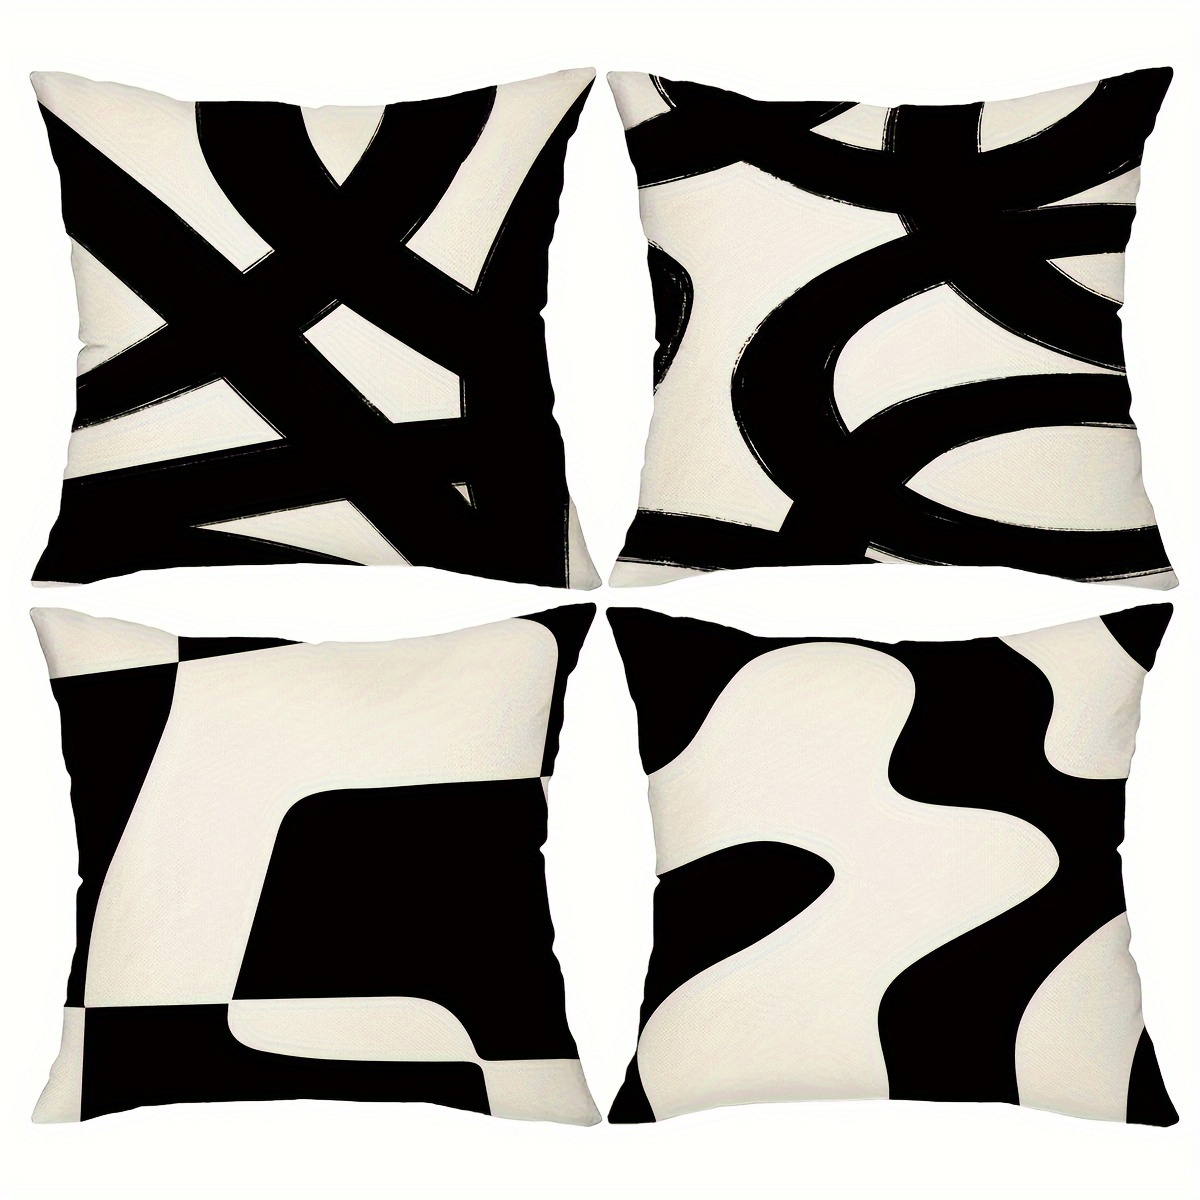 

4pcs Black Abstract Geometric Throw Pillow Covers, 18*18inch Modern Neutral Art Home Decor Cushion Cases For Porch Patio Couch Sofa Living Room Outdoor, Without Pillow Inserts